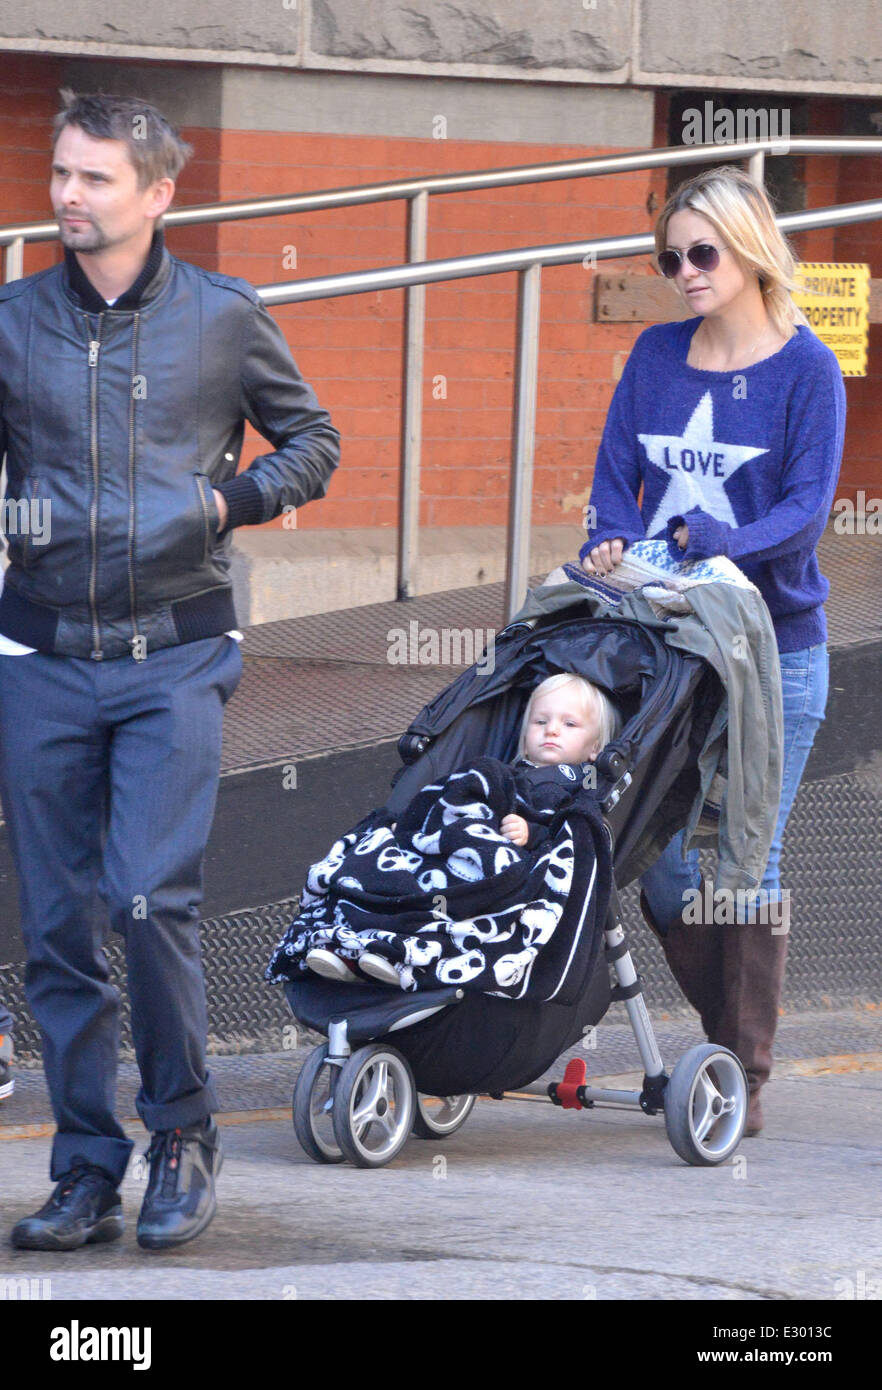 Kate Hudson takes her son Bingham Hawn Bellamy out in a stroller and head for lunch with family at Bubby's restaurant in Manhattan  Featuring: Kate Hudson,Matt Bellamy,Bingham Bellamy,Ryder Robinson Where: New York City, NY, United States When: 17 Apr 201 Stock Photo